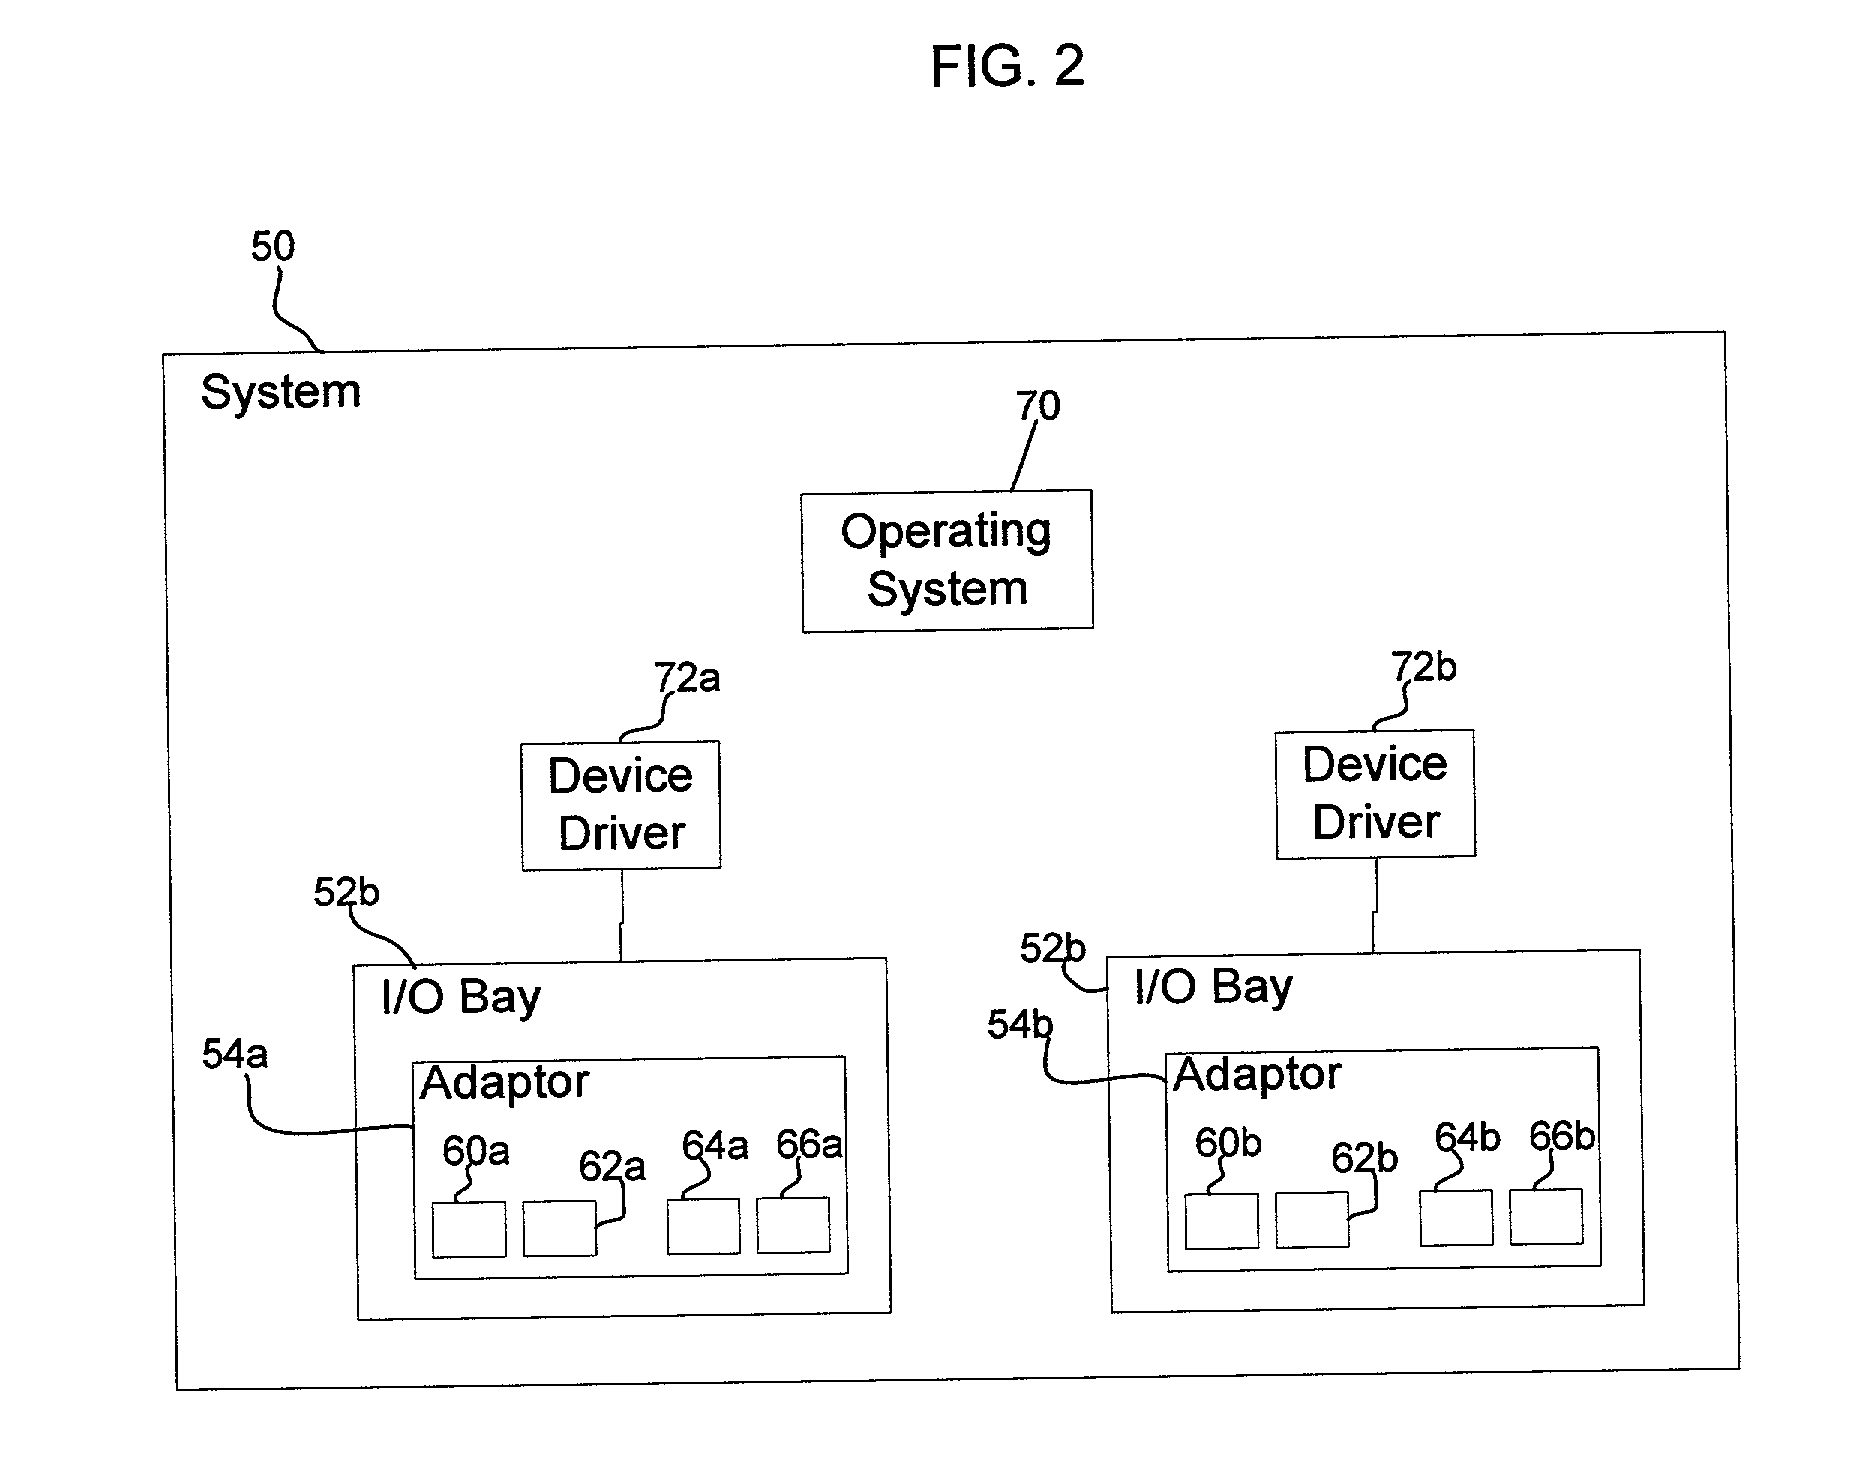 Method, system, and program for error handling in a dual adaptor system where one adaptor is a master